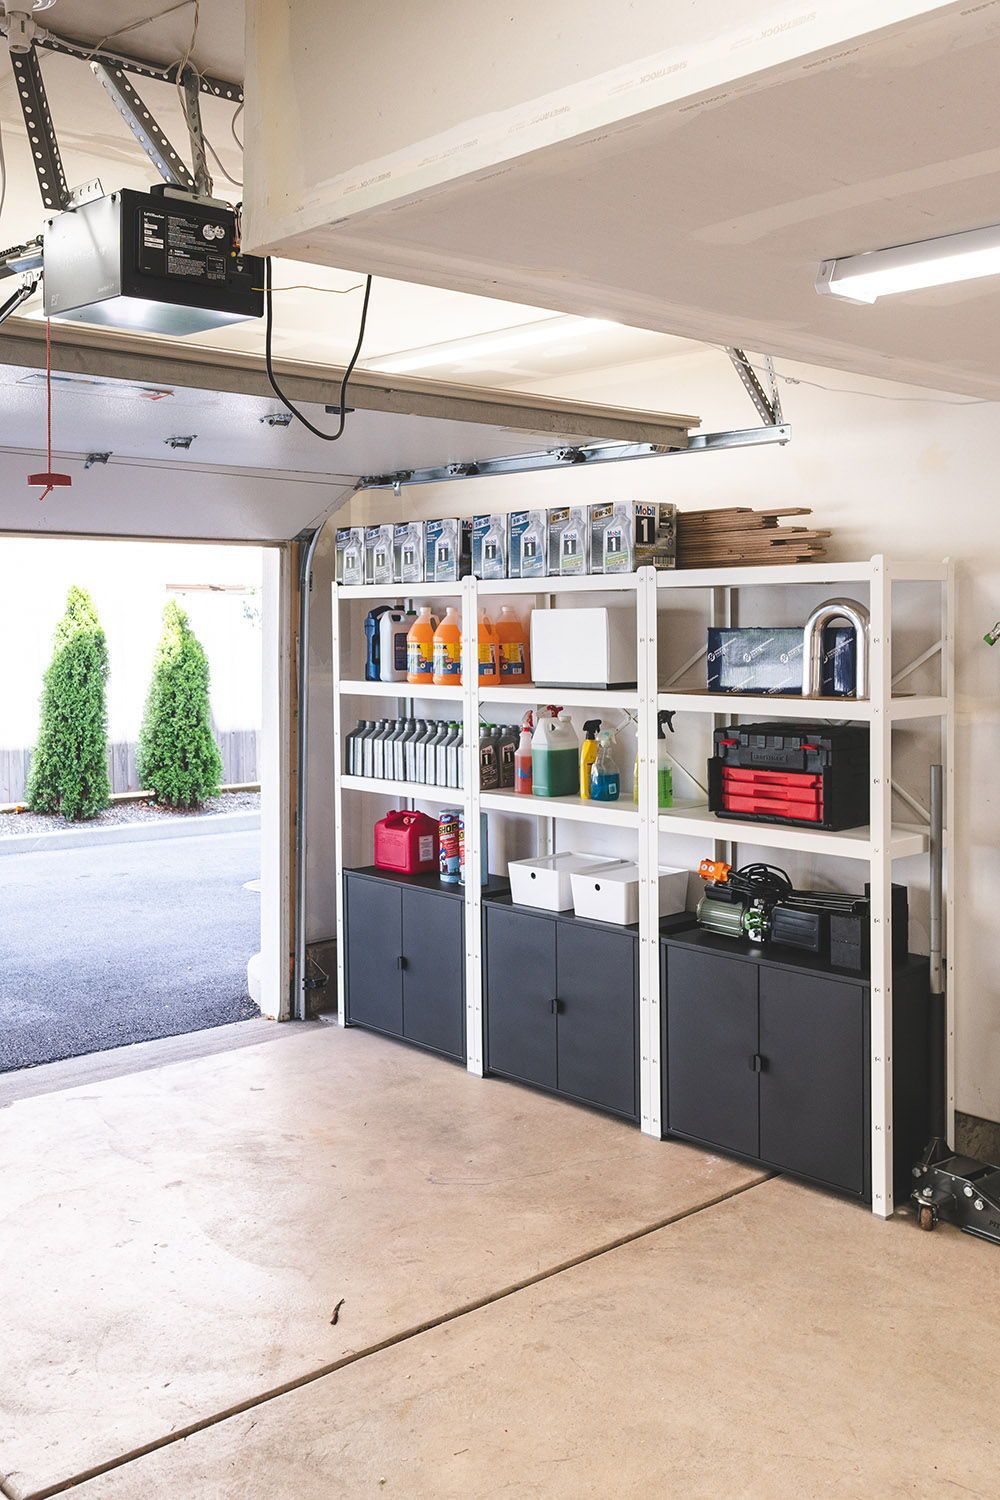 Making your garage storage ideas work
for  you